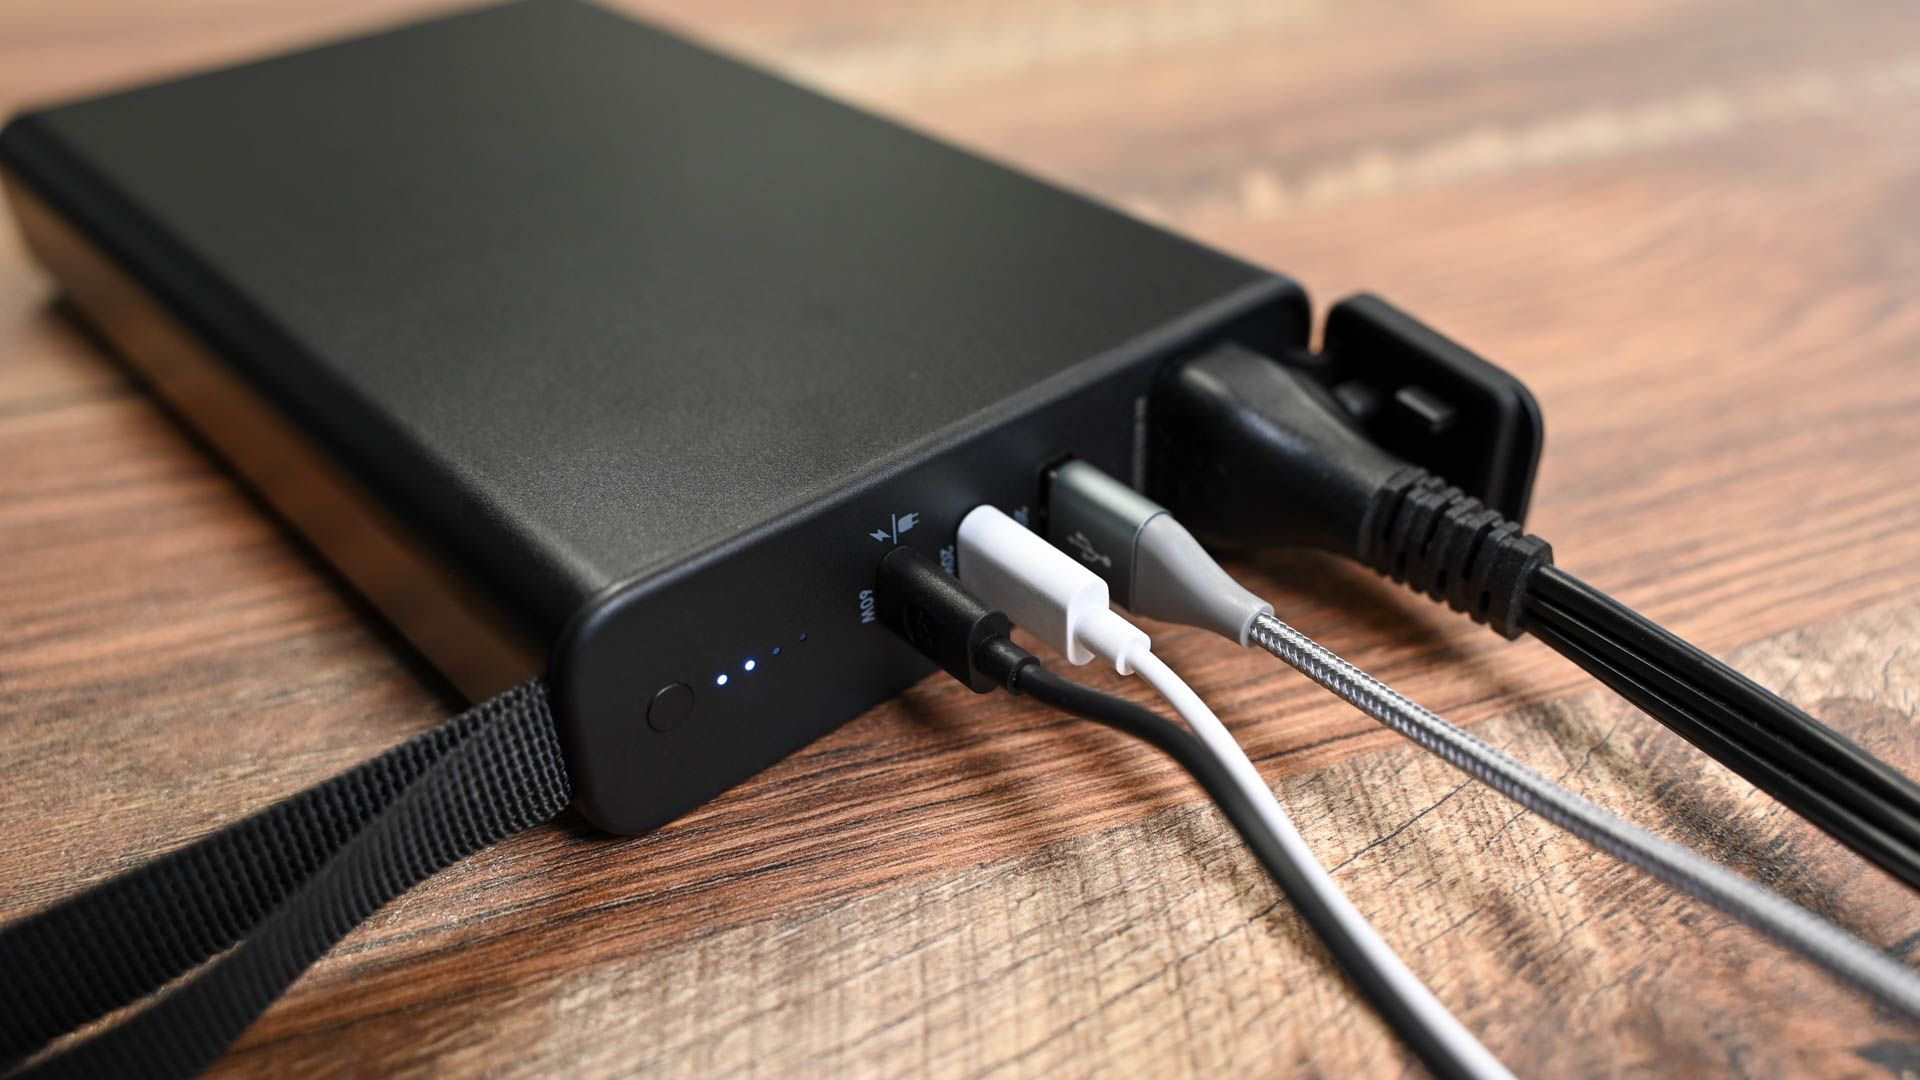 The mophie powerstation Pro AC with four cables connected.